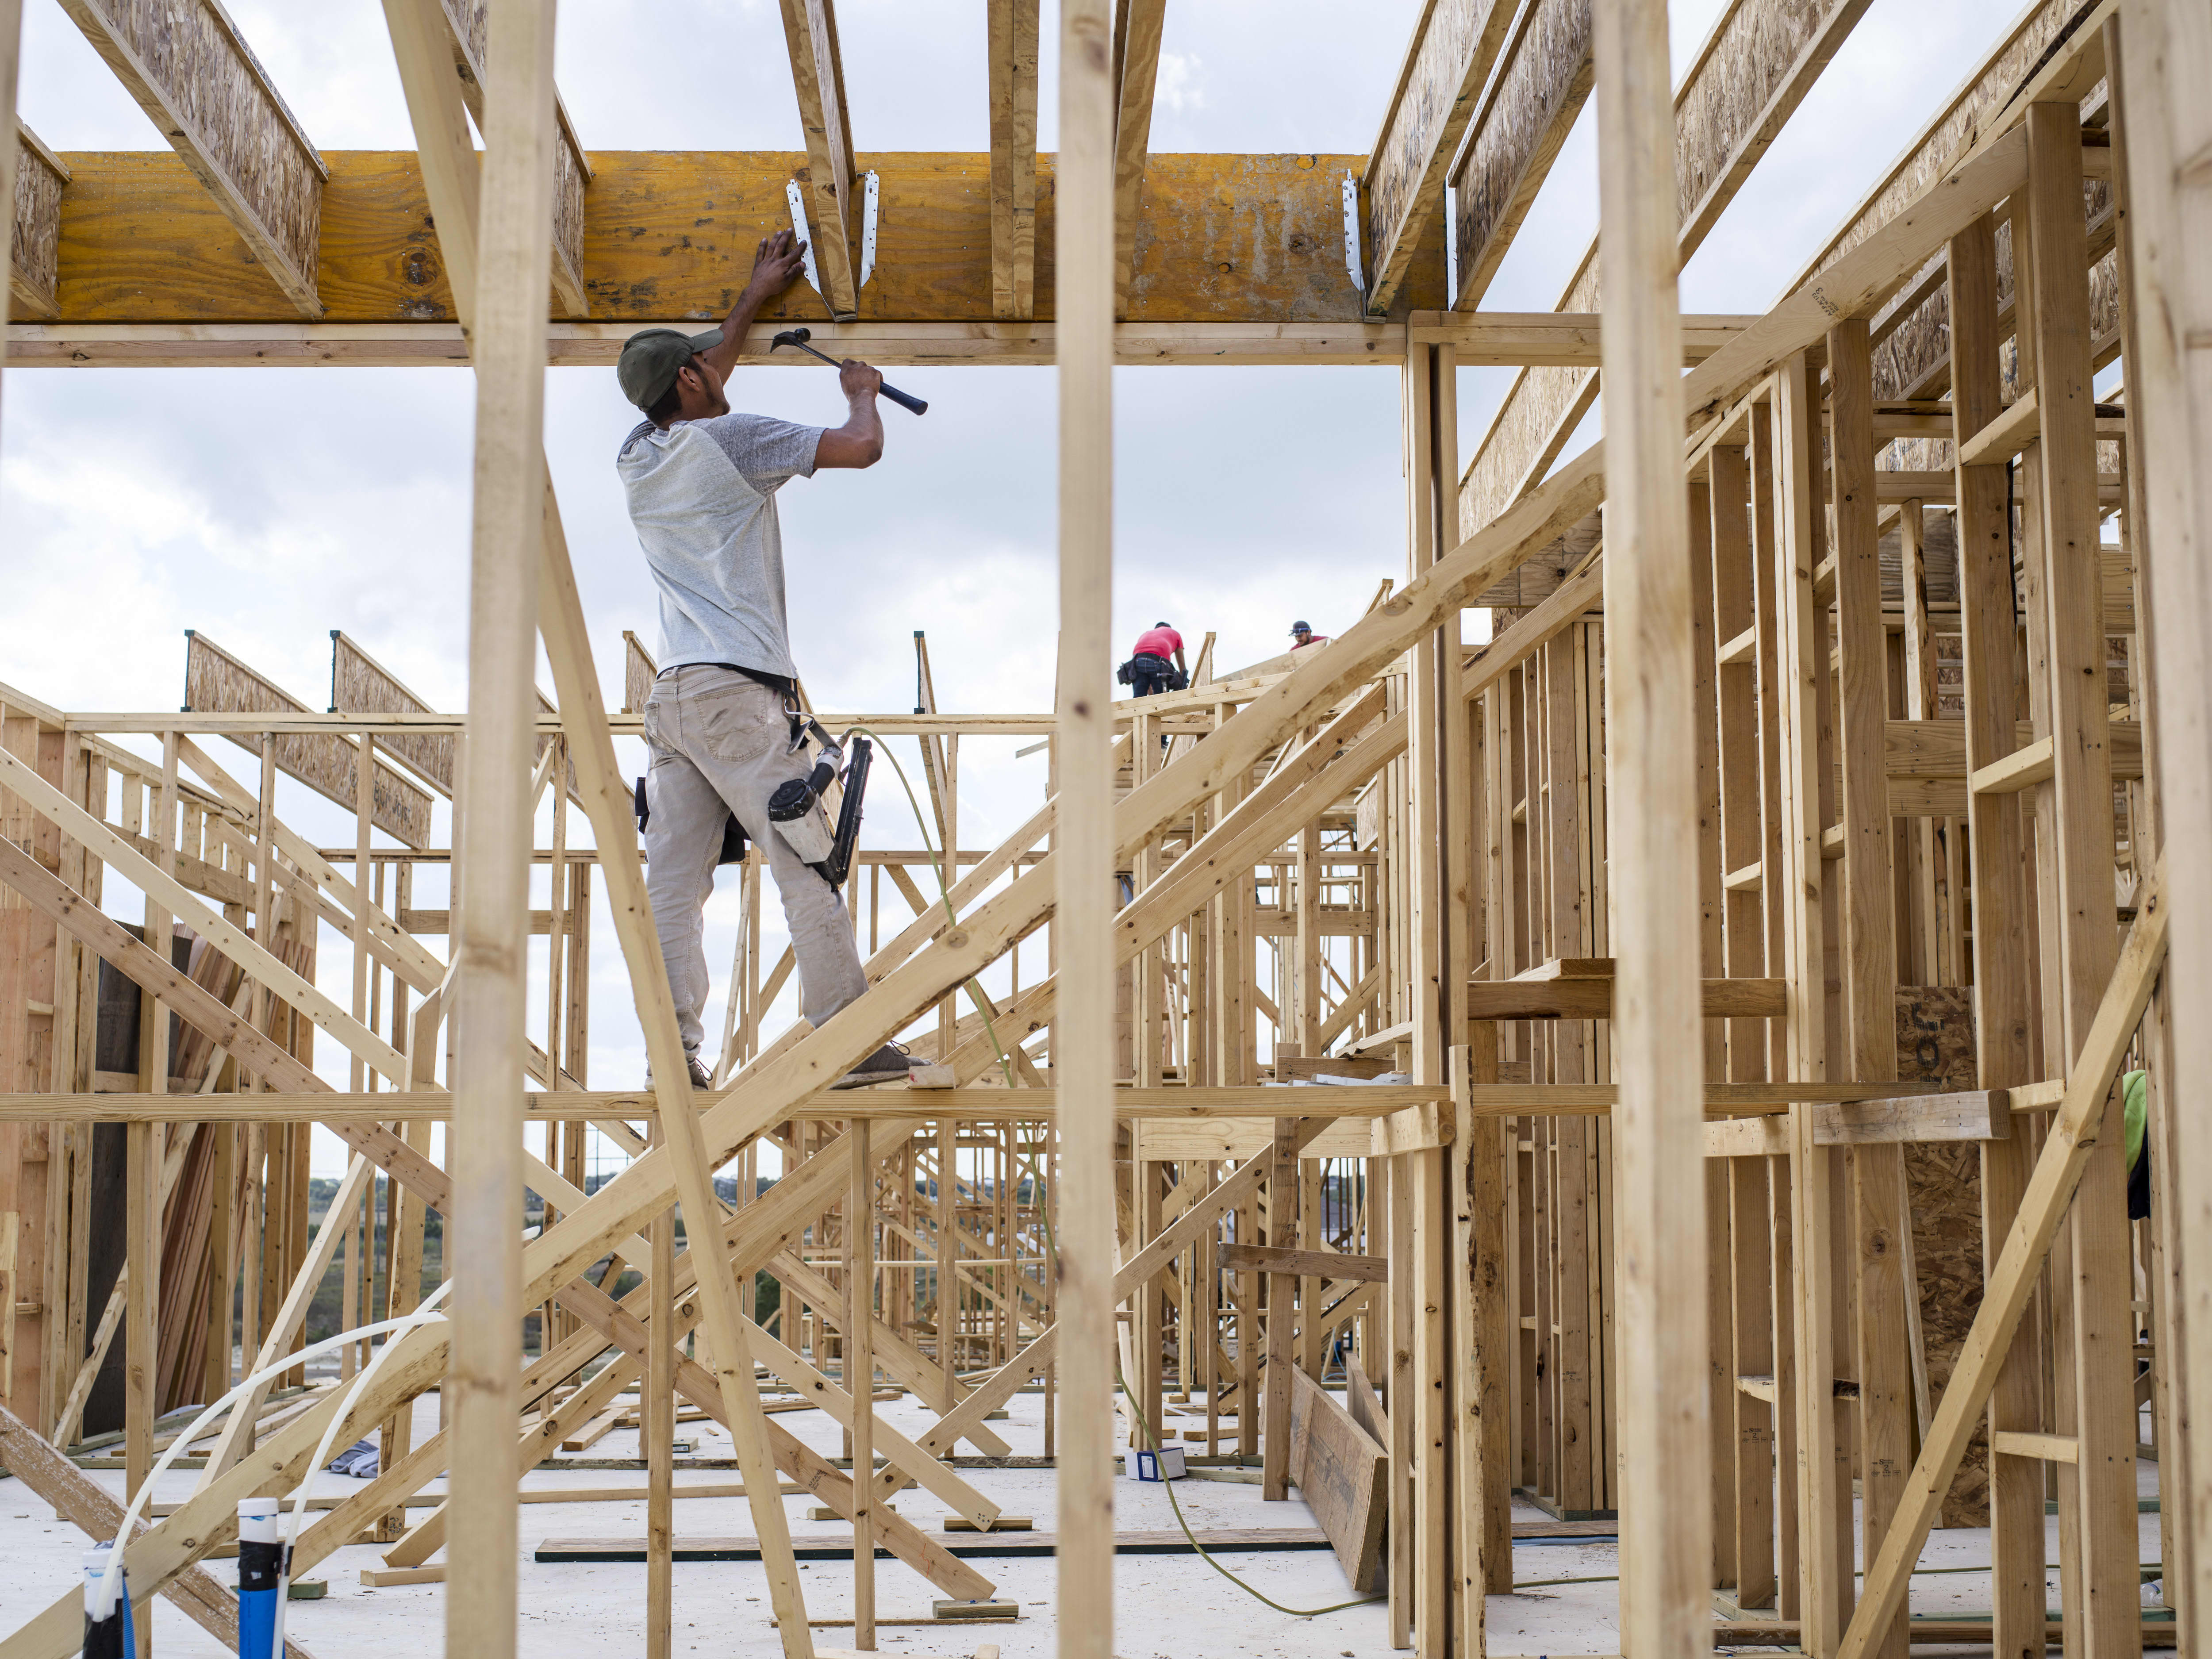 Homebuilder confidence ends the year on a high even as costs rise and labor is in short supply